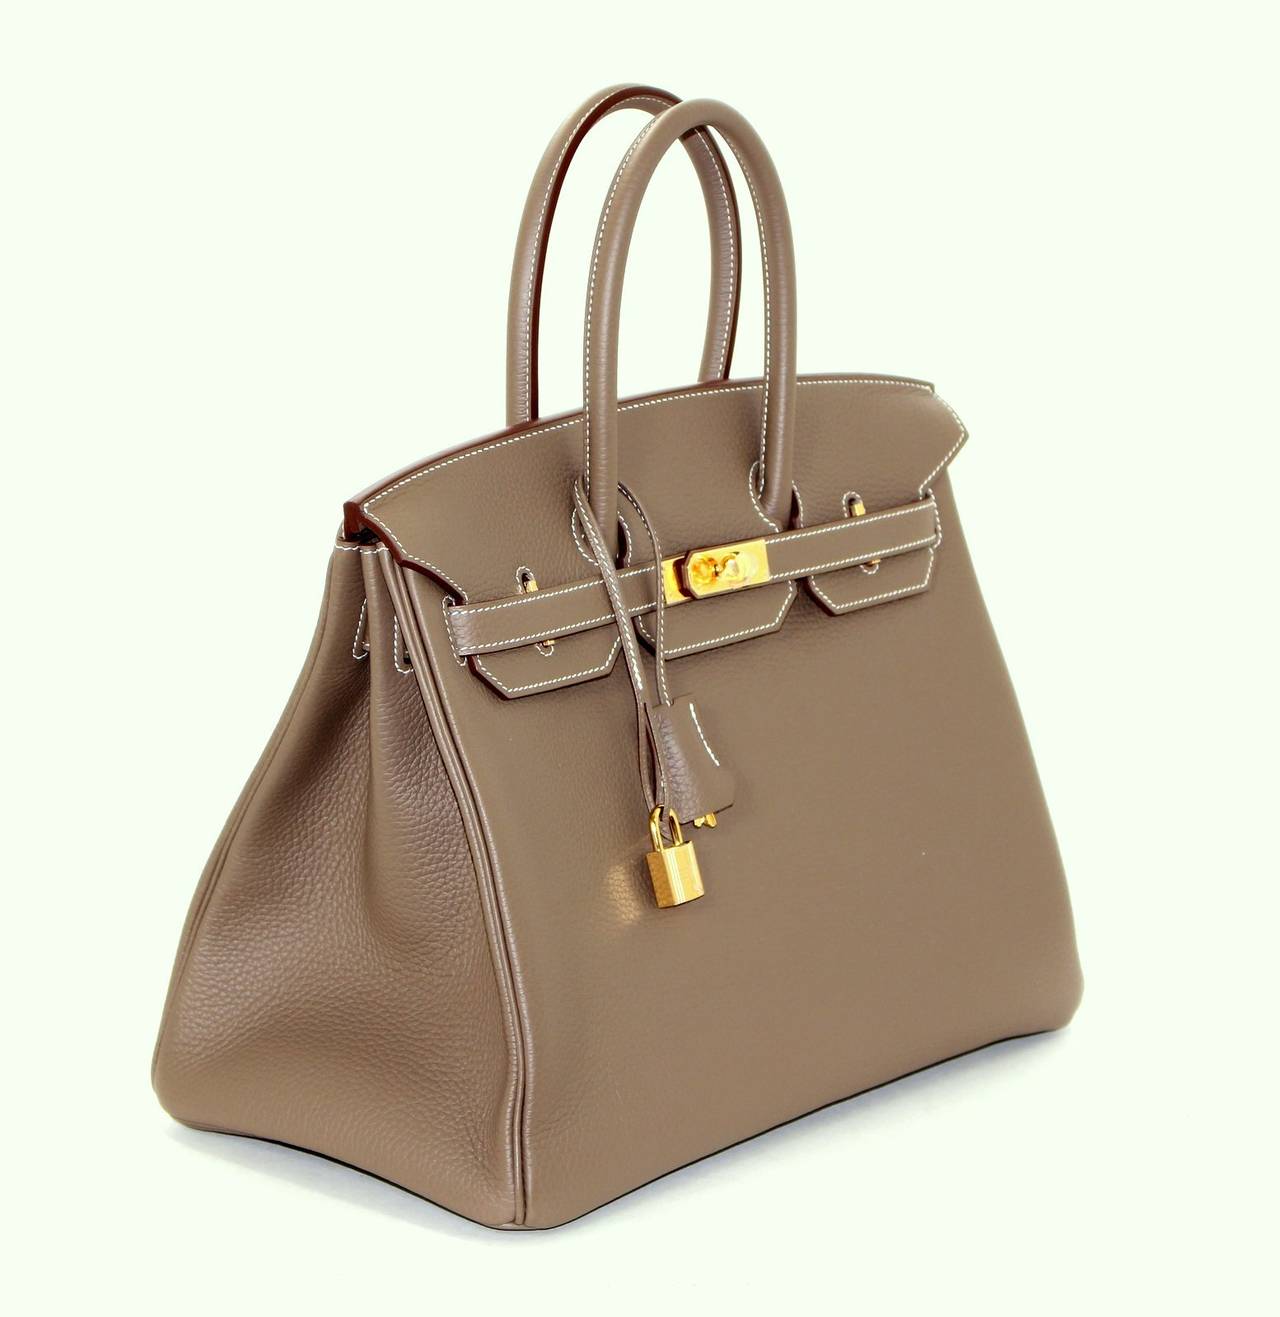 HERMES Etoupe Clemence Birkin Bag- Taupe Color with Gold HW 35 cm at 1stdibs